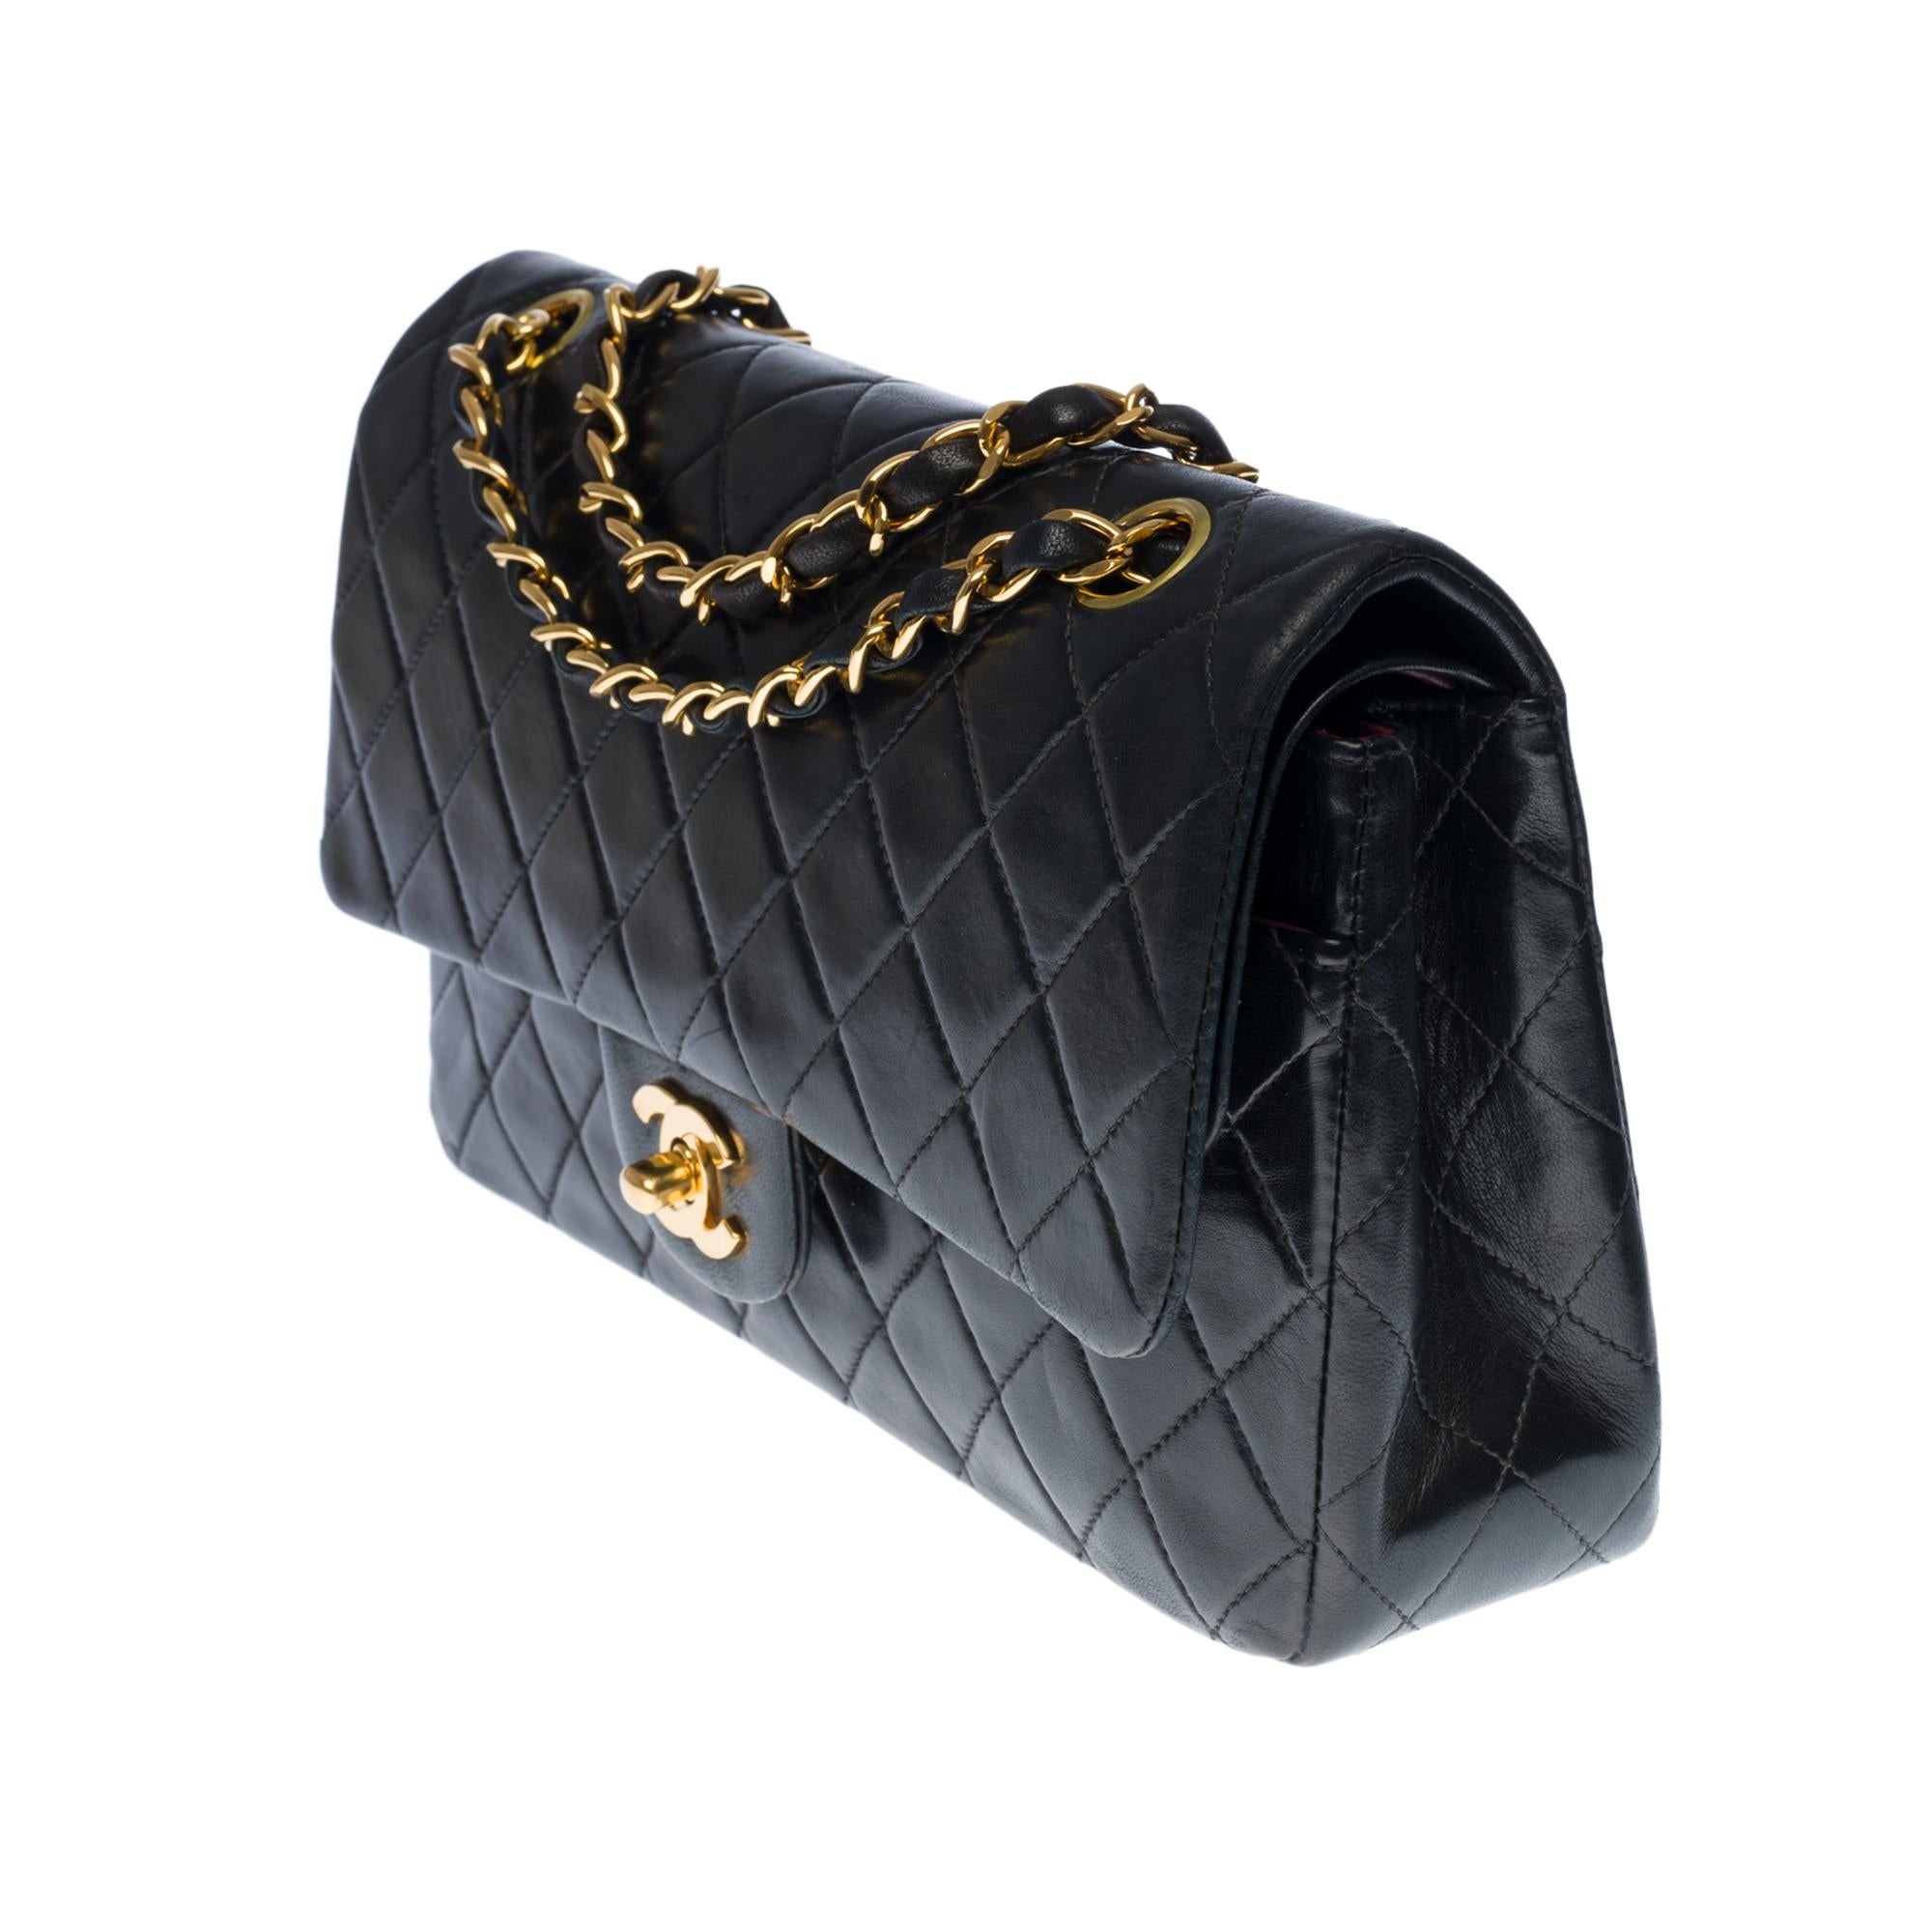 Black Chanel Timeless Medium double flap Shoulder bag in black quilted lambskin, GHW